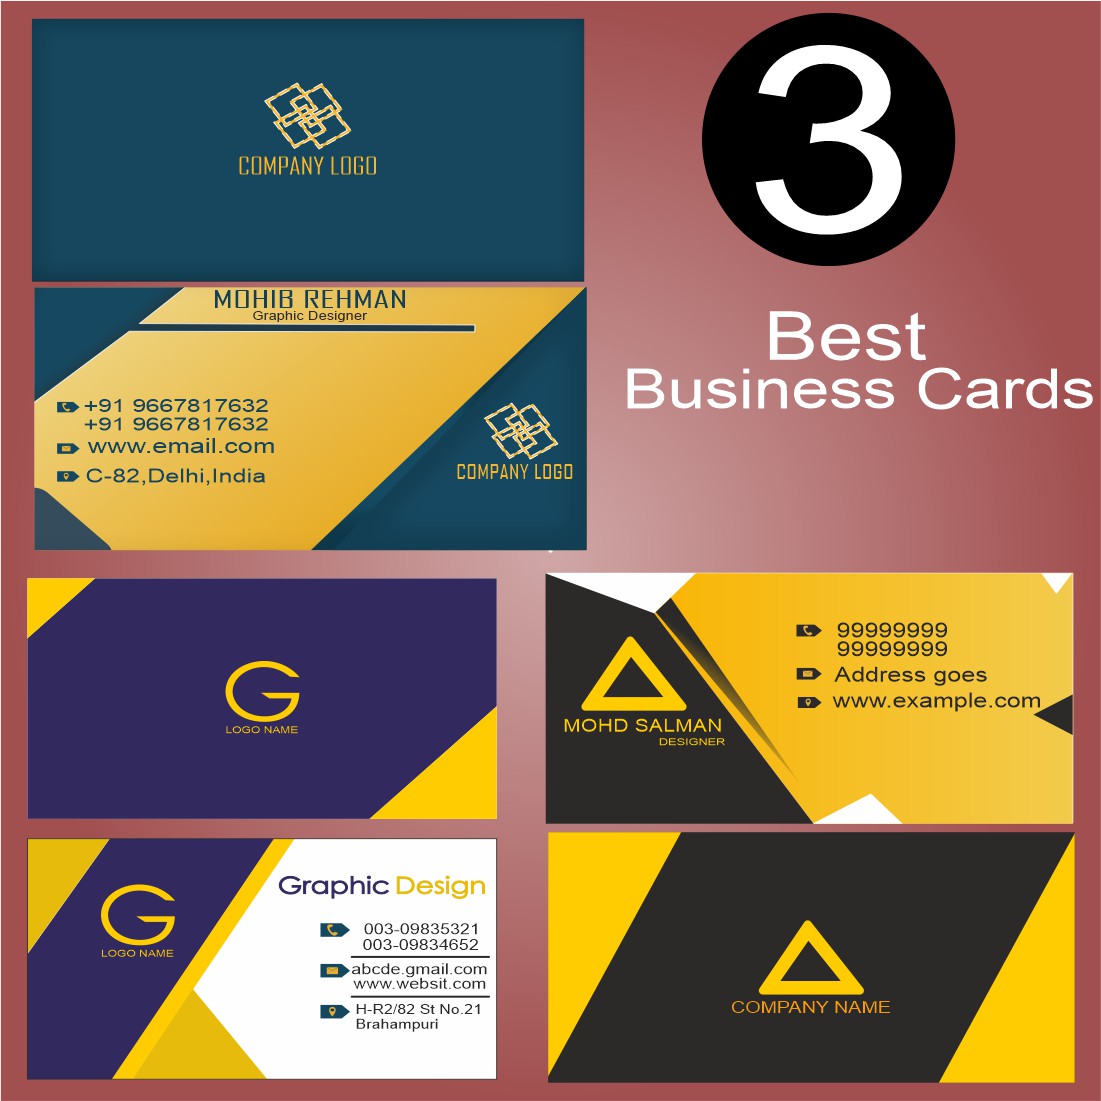 3 Best Business Cards Designs with High-Resolution preview image.